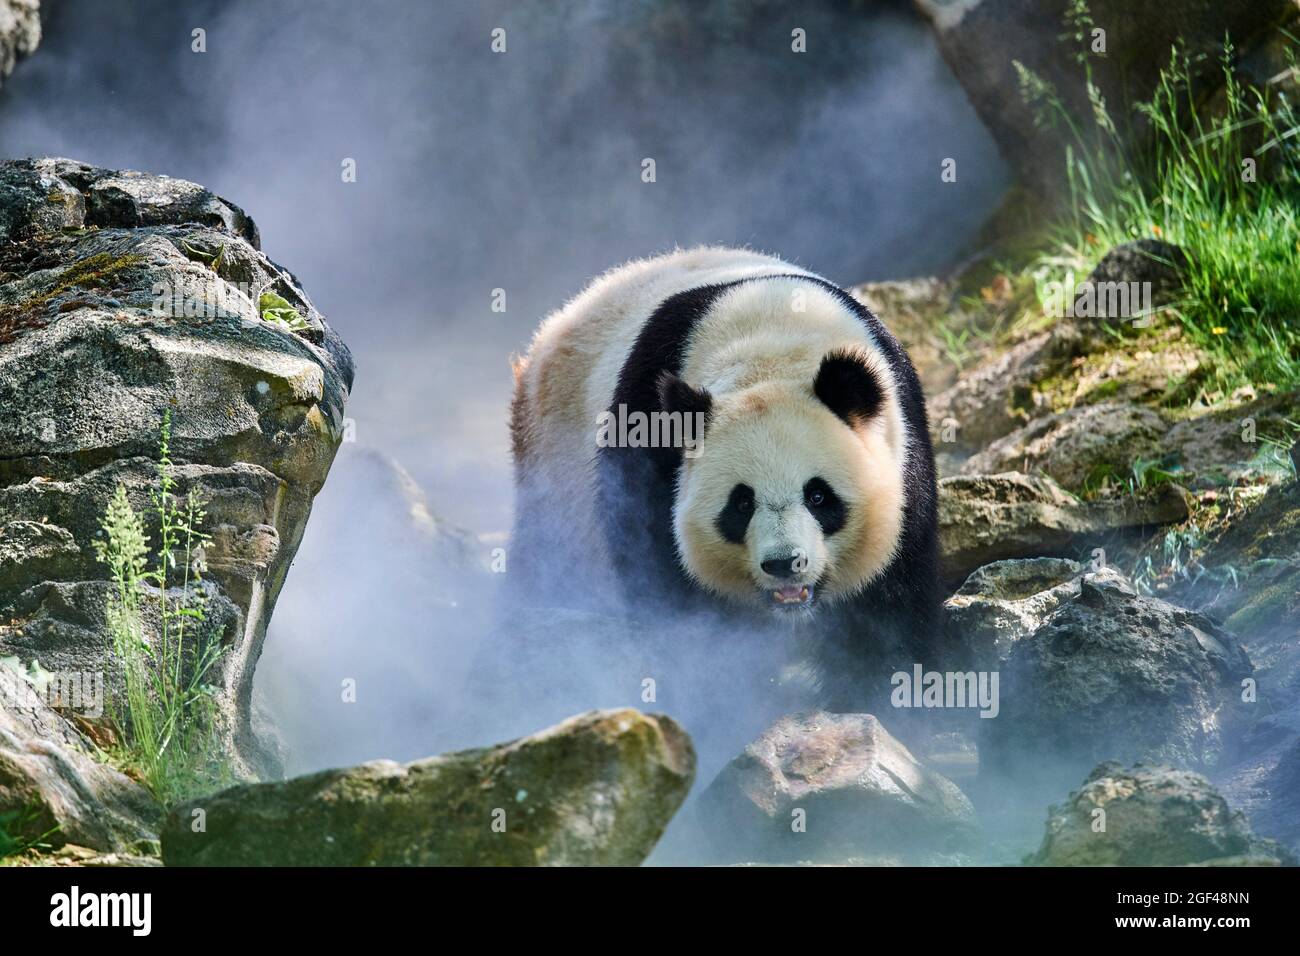 Giant panda (Ailuropoda melanoleuca) female Huan Huan out in her enclosure in mist, Captive at Beauval Zoo, Saint Aignan sur Cher, France. The mist Stock Photo